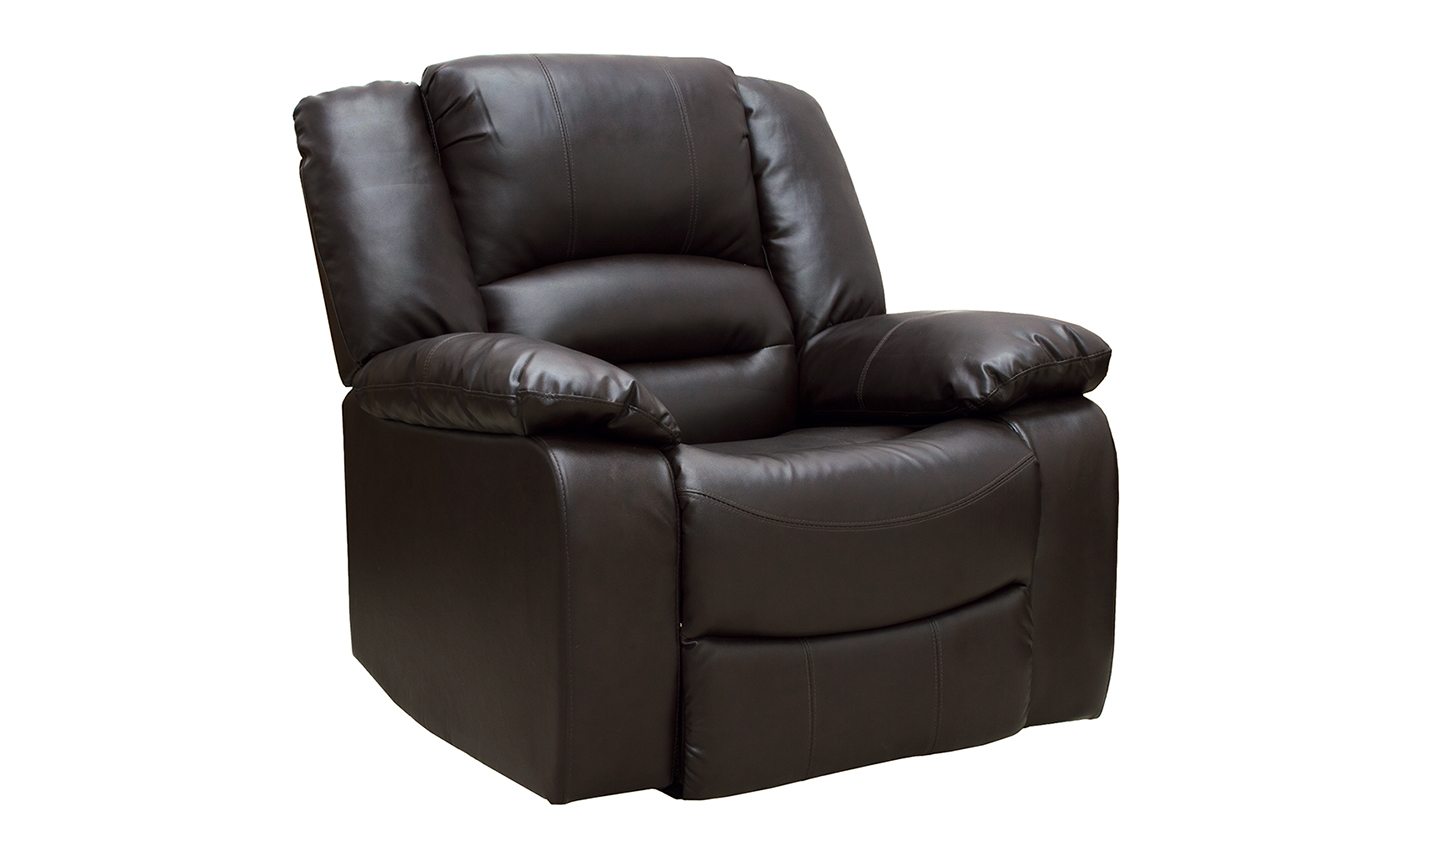 Barletto Brown 1 Seater Recliner Chair